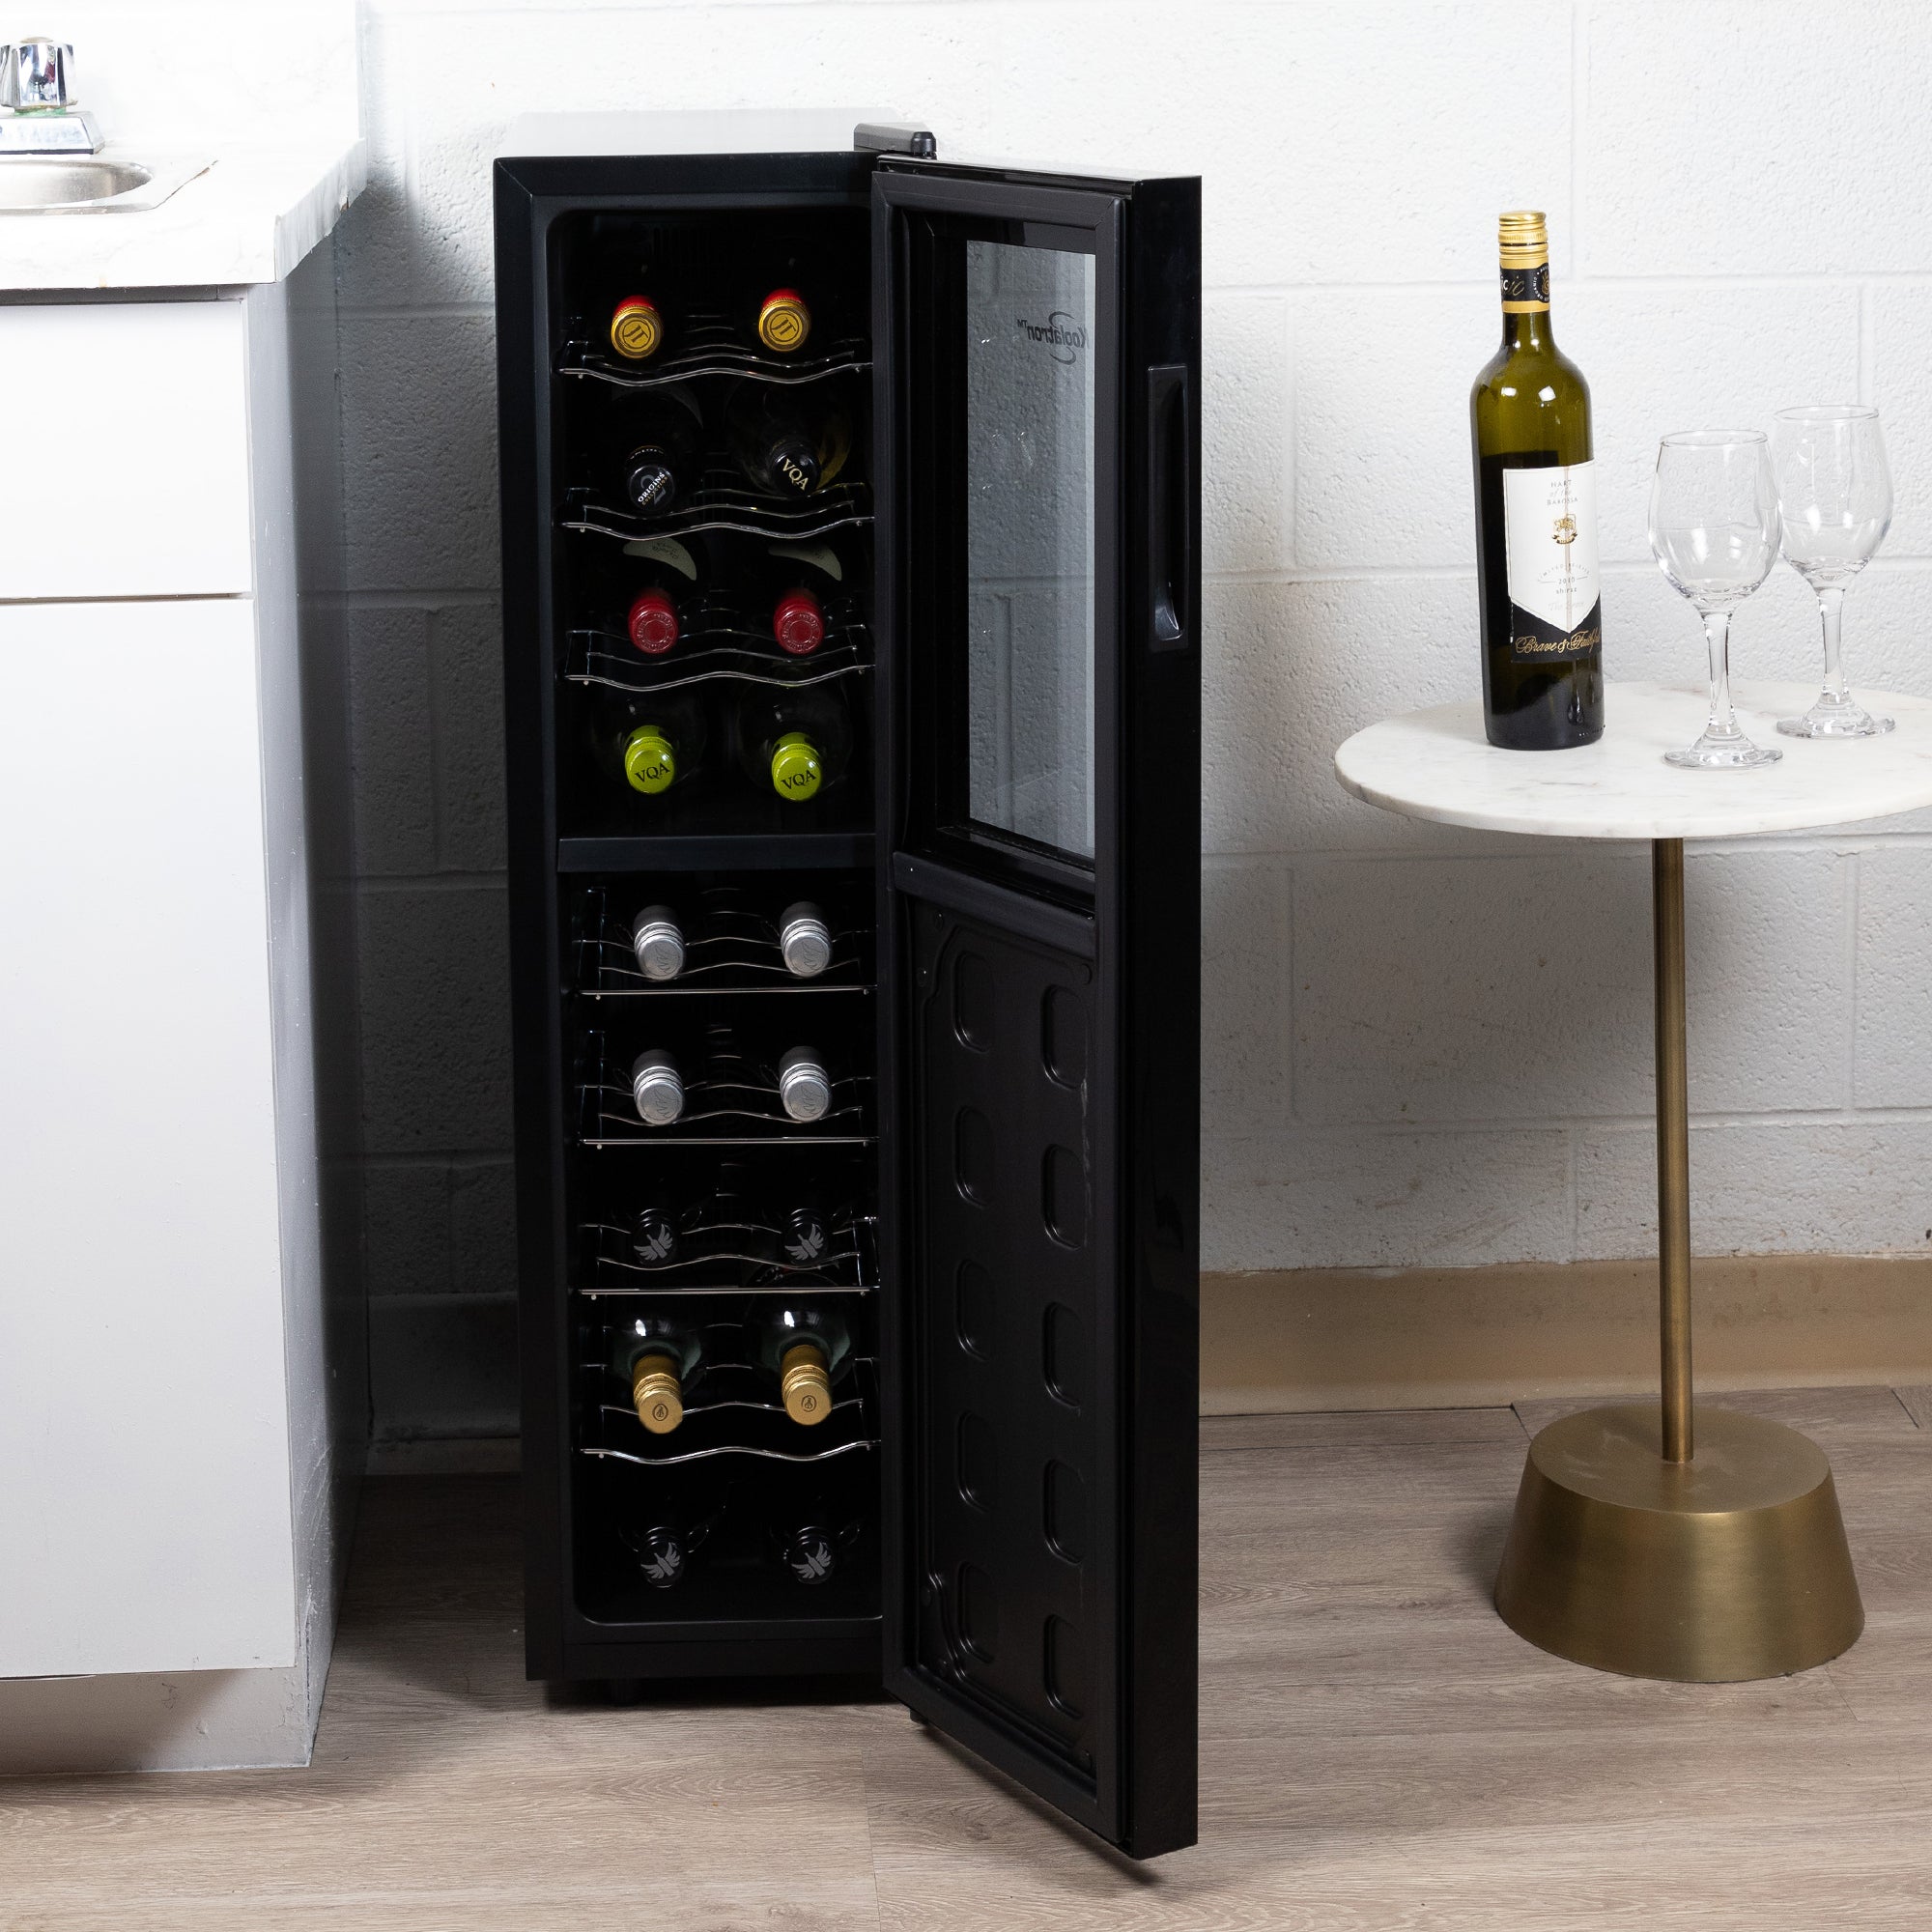 Koolatron 18 bottle dual zone wine cooler, open and filled with bottles of wine, on a gold-coloured sideboard with a bottle of wine and one glass beside it